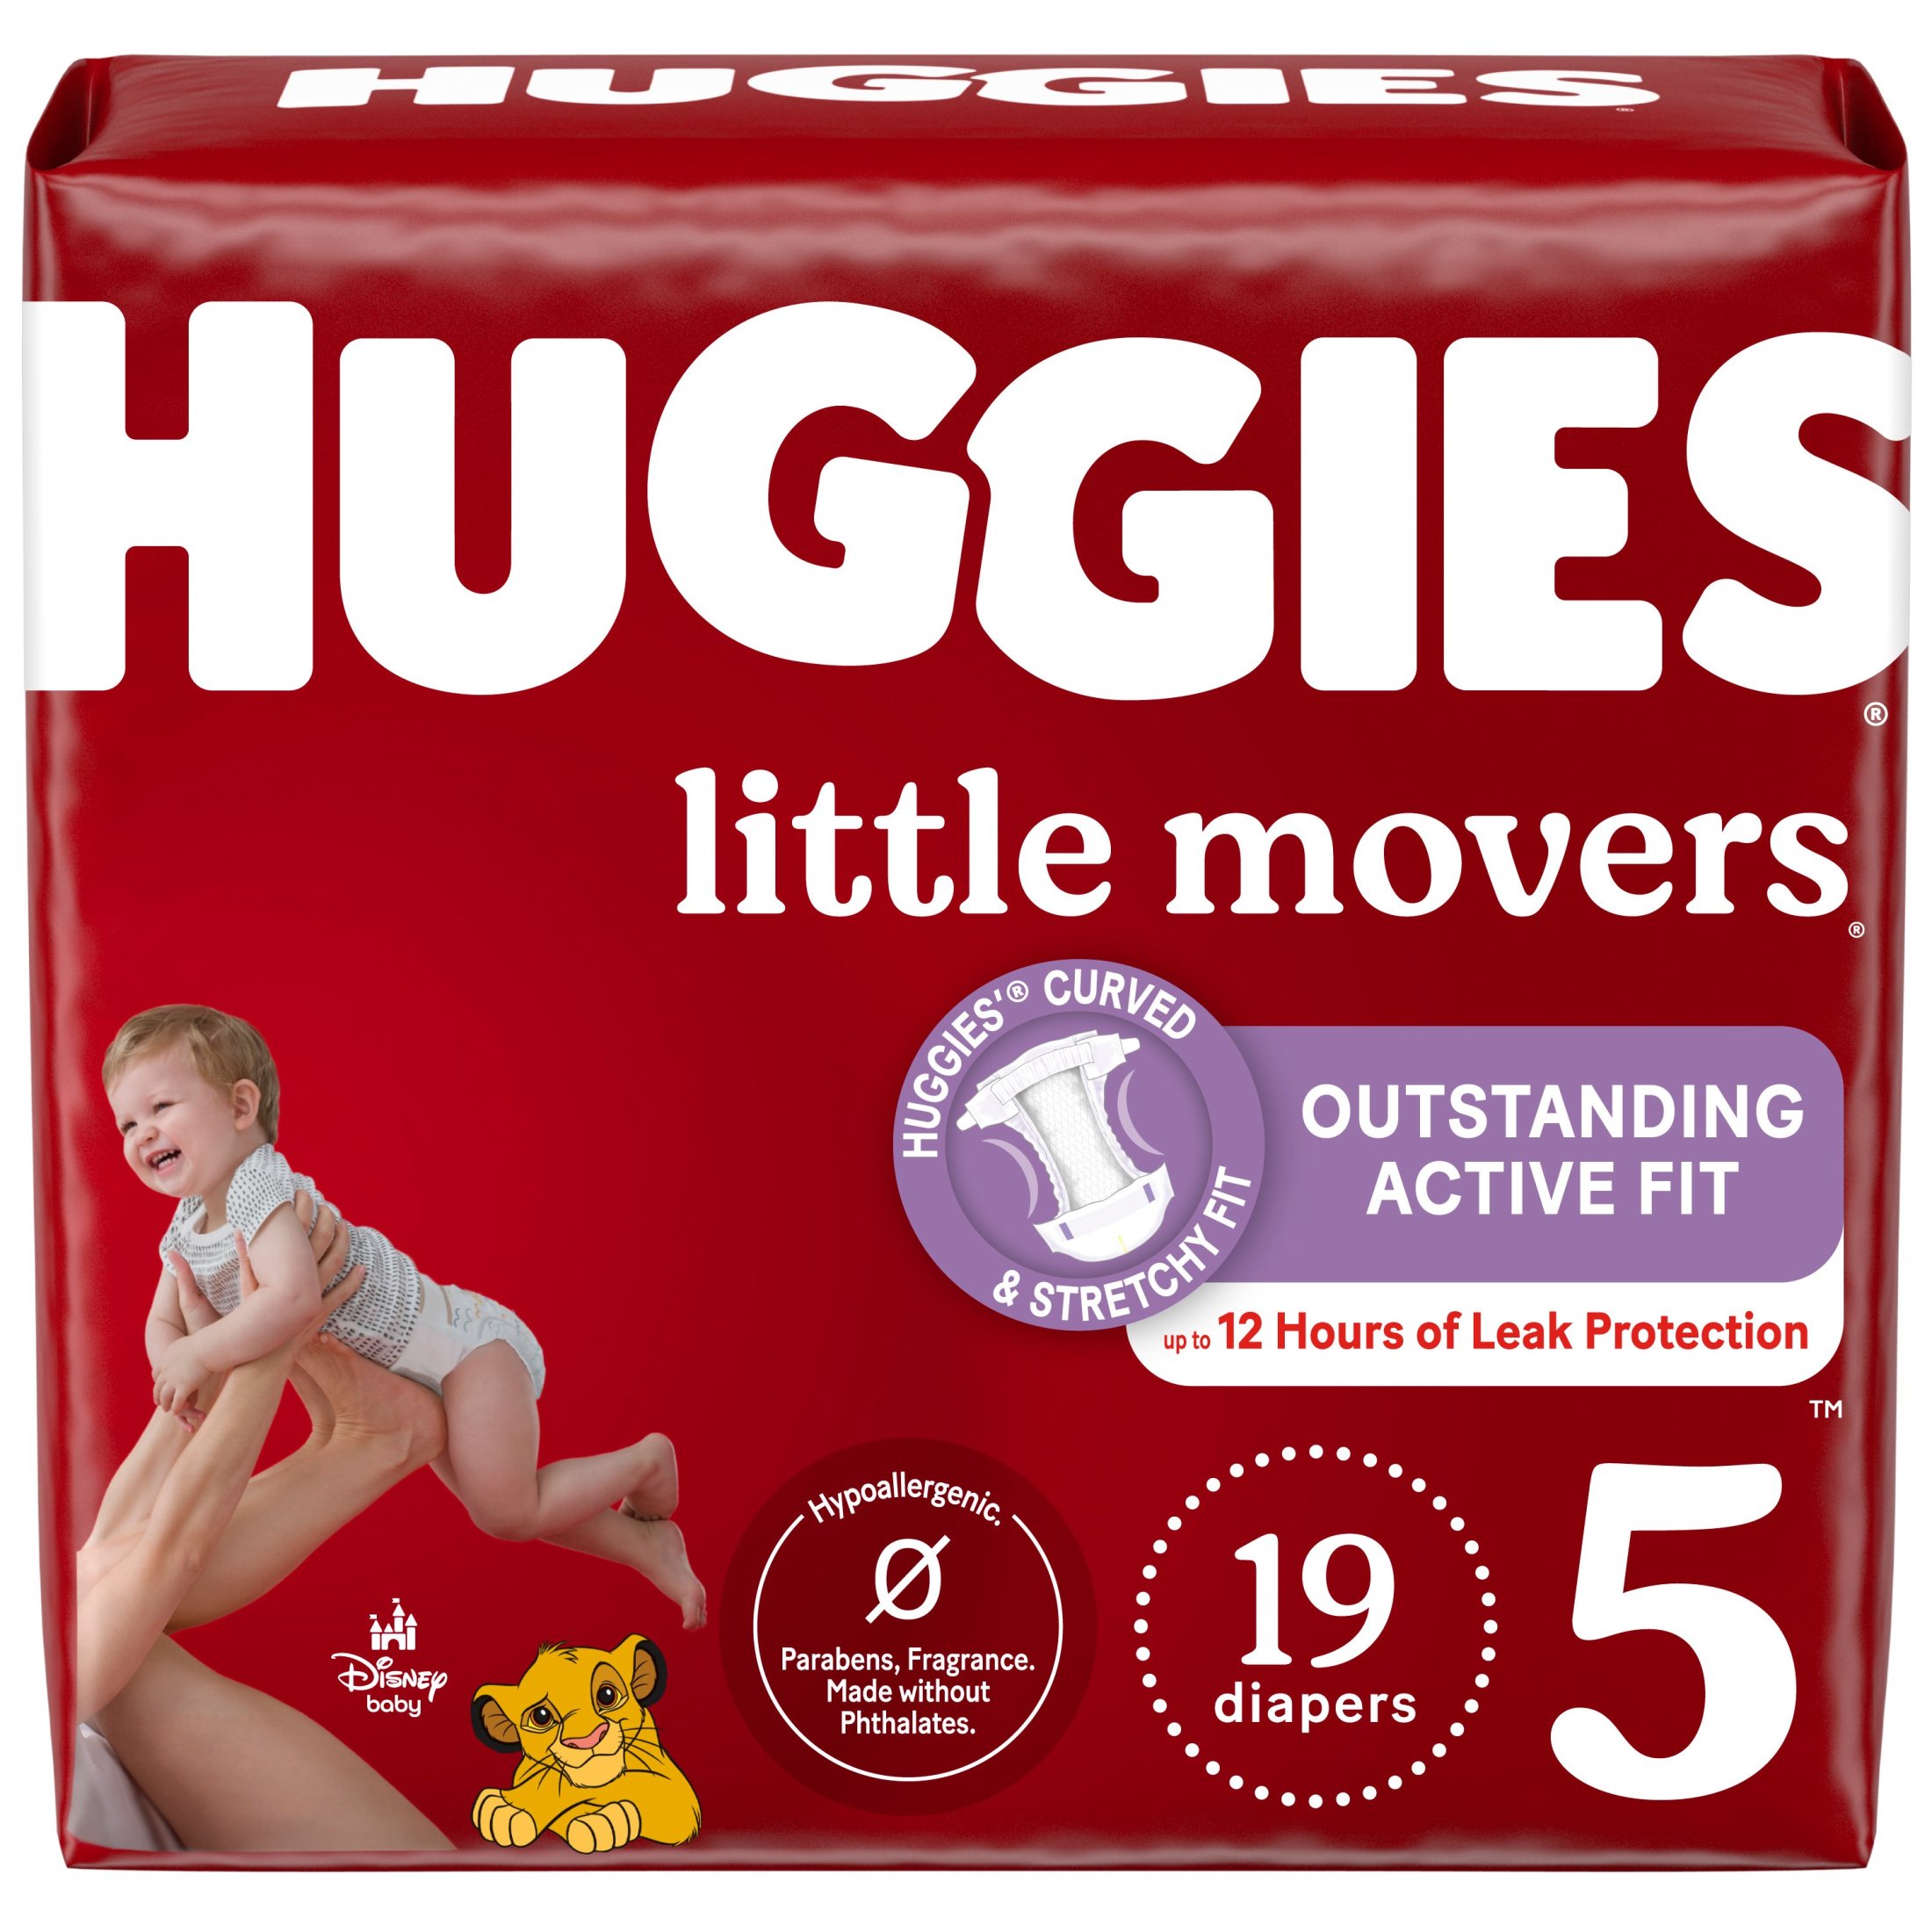 Huggies Little Movers Baby Diapers, Size 5, 19 Ct (Select for More Options) - image 3 of 16